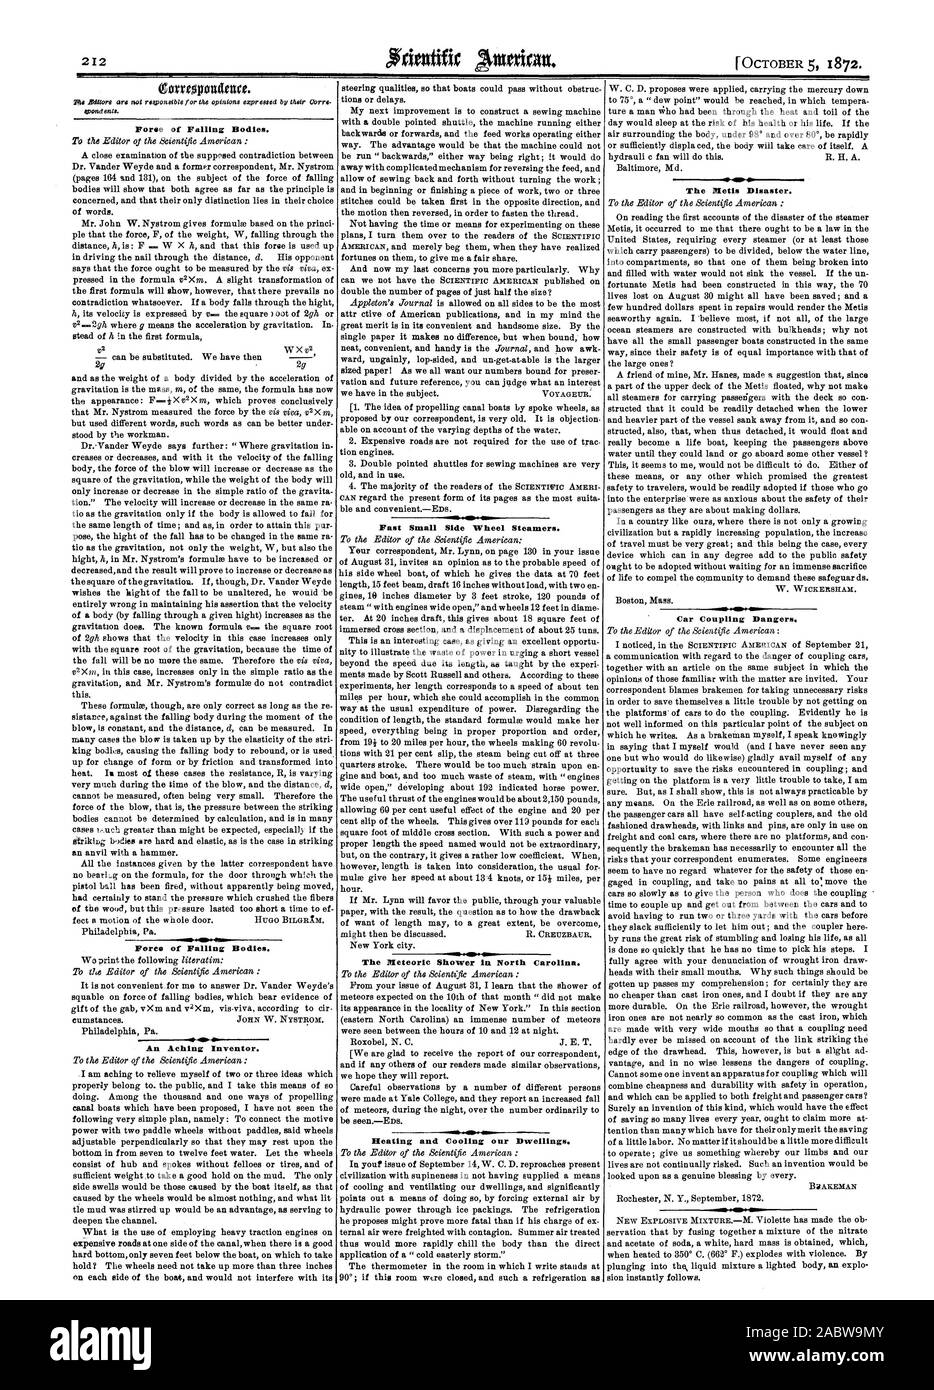 Foree of Falling Bodies. Fares of Falling Bodies. An Aching Inventor. Fast Small Side Wheel Steamers. The Meteoric Shower in North Carolina. Heating and Cooling our Dwellings. The Netts Disaster. Car Coupling Dangers., scientific american, 1872-10-05 Stock Photo